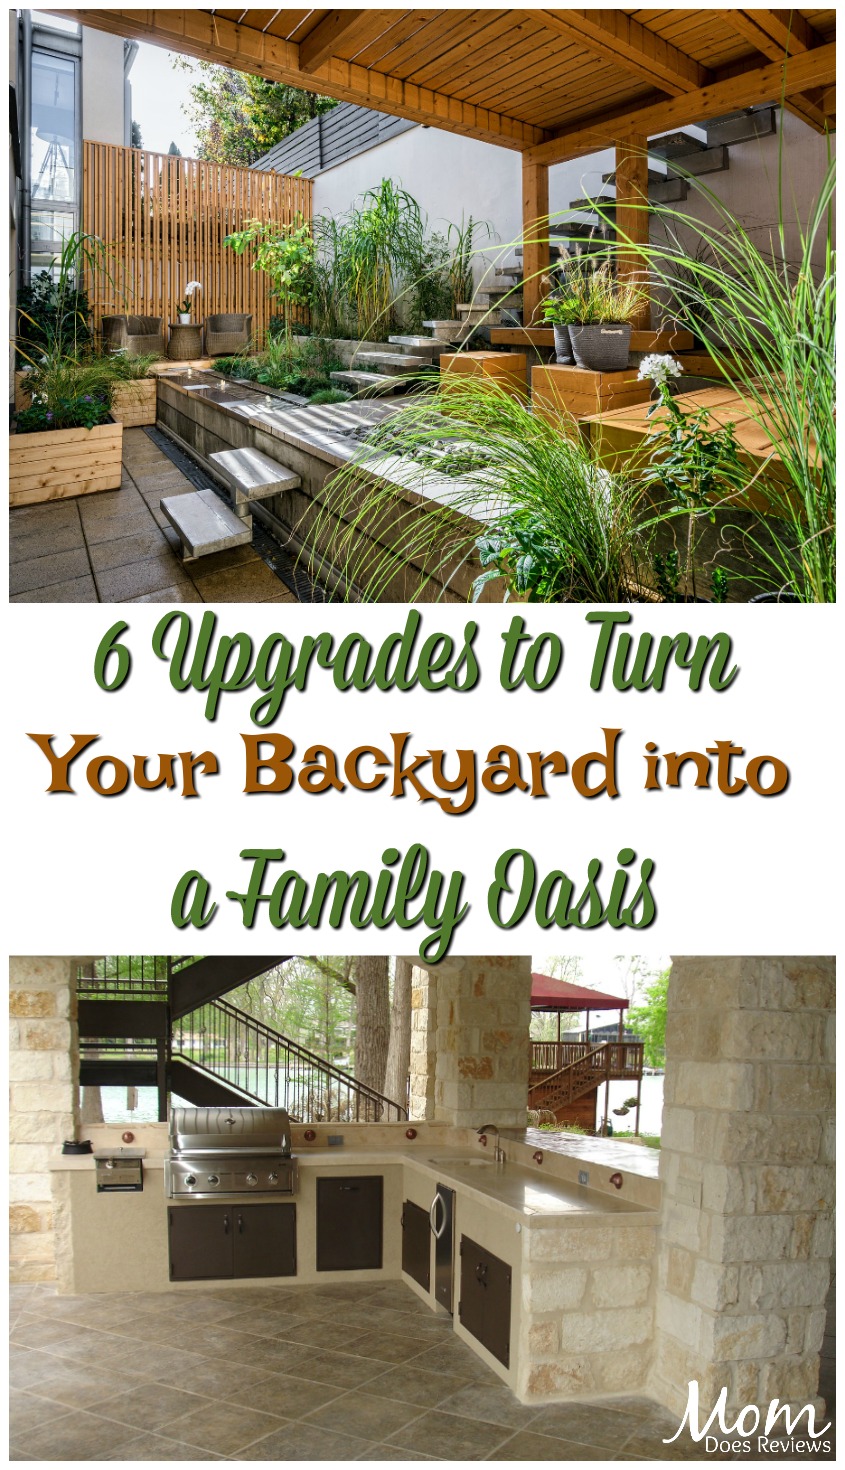 6 Upgrades for Turning Your Backyard into a Family Oasis #home #backyard #diy #family 